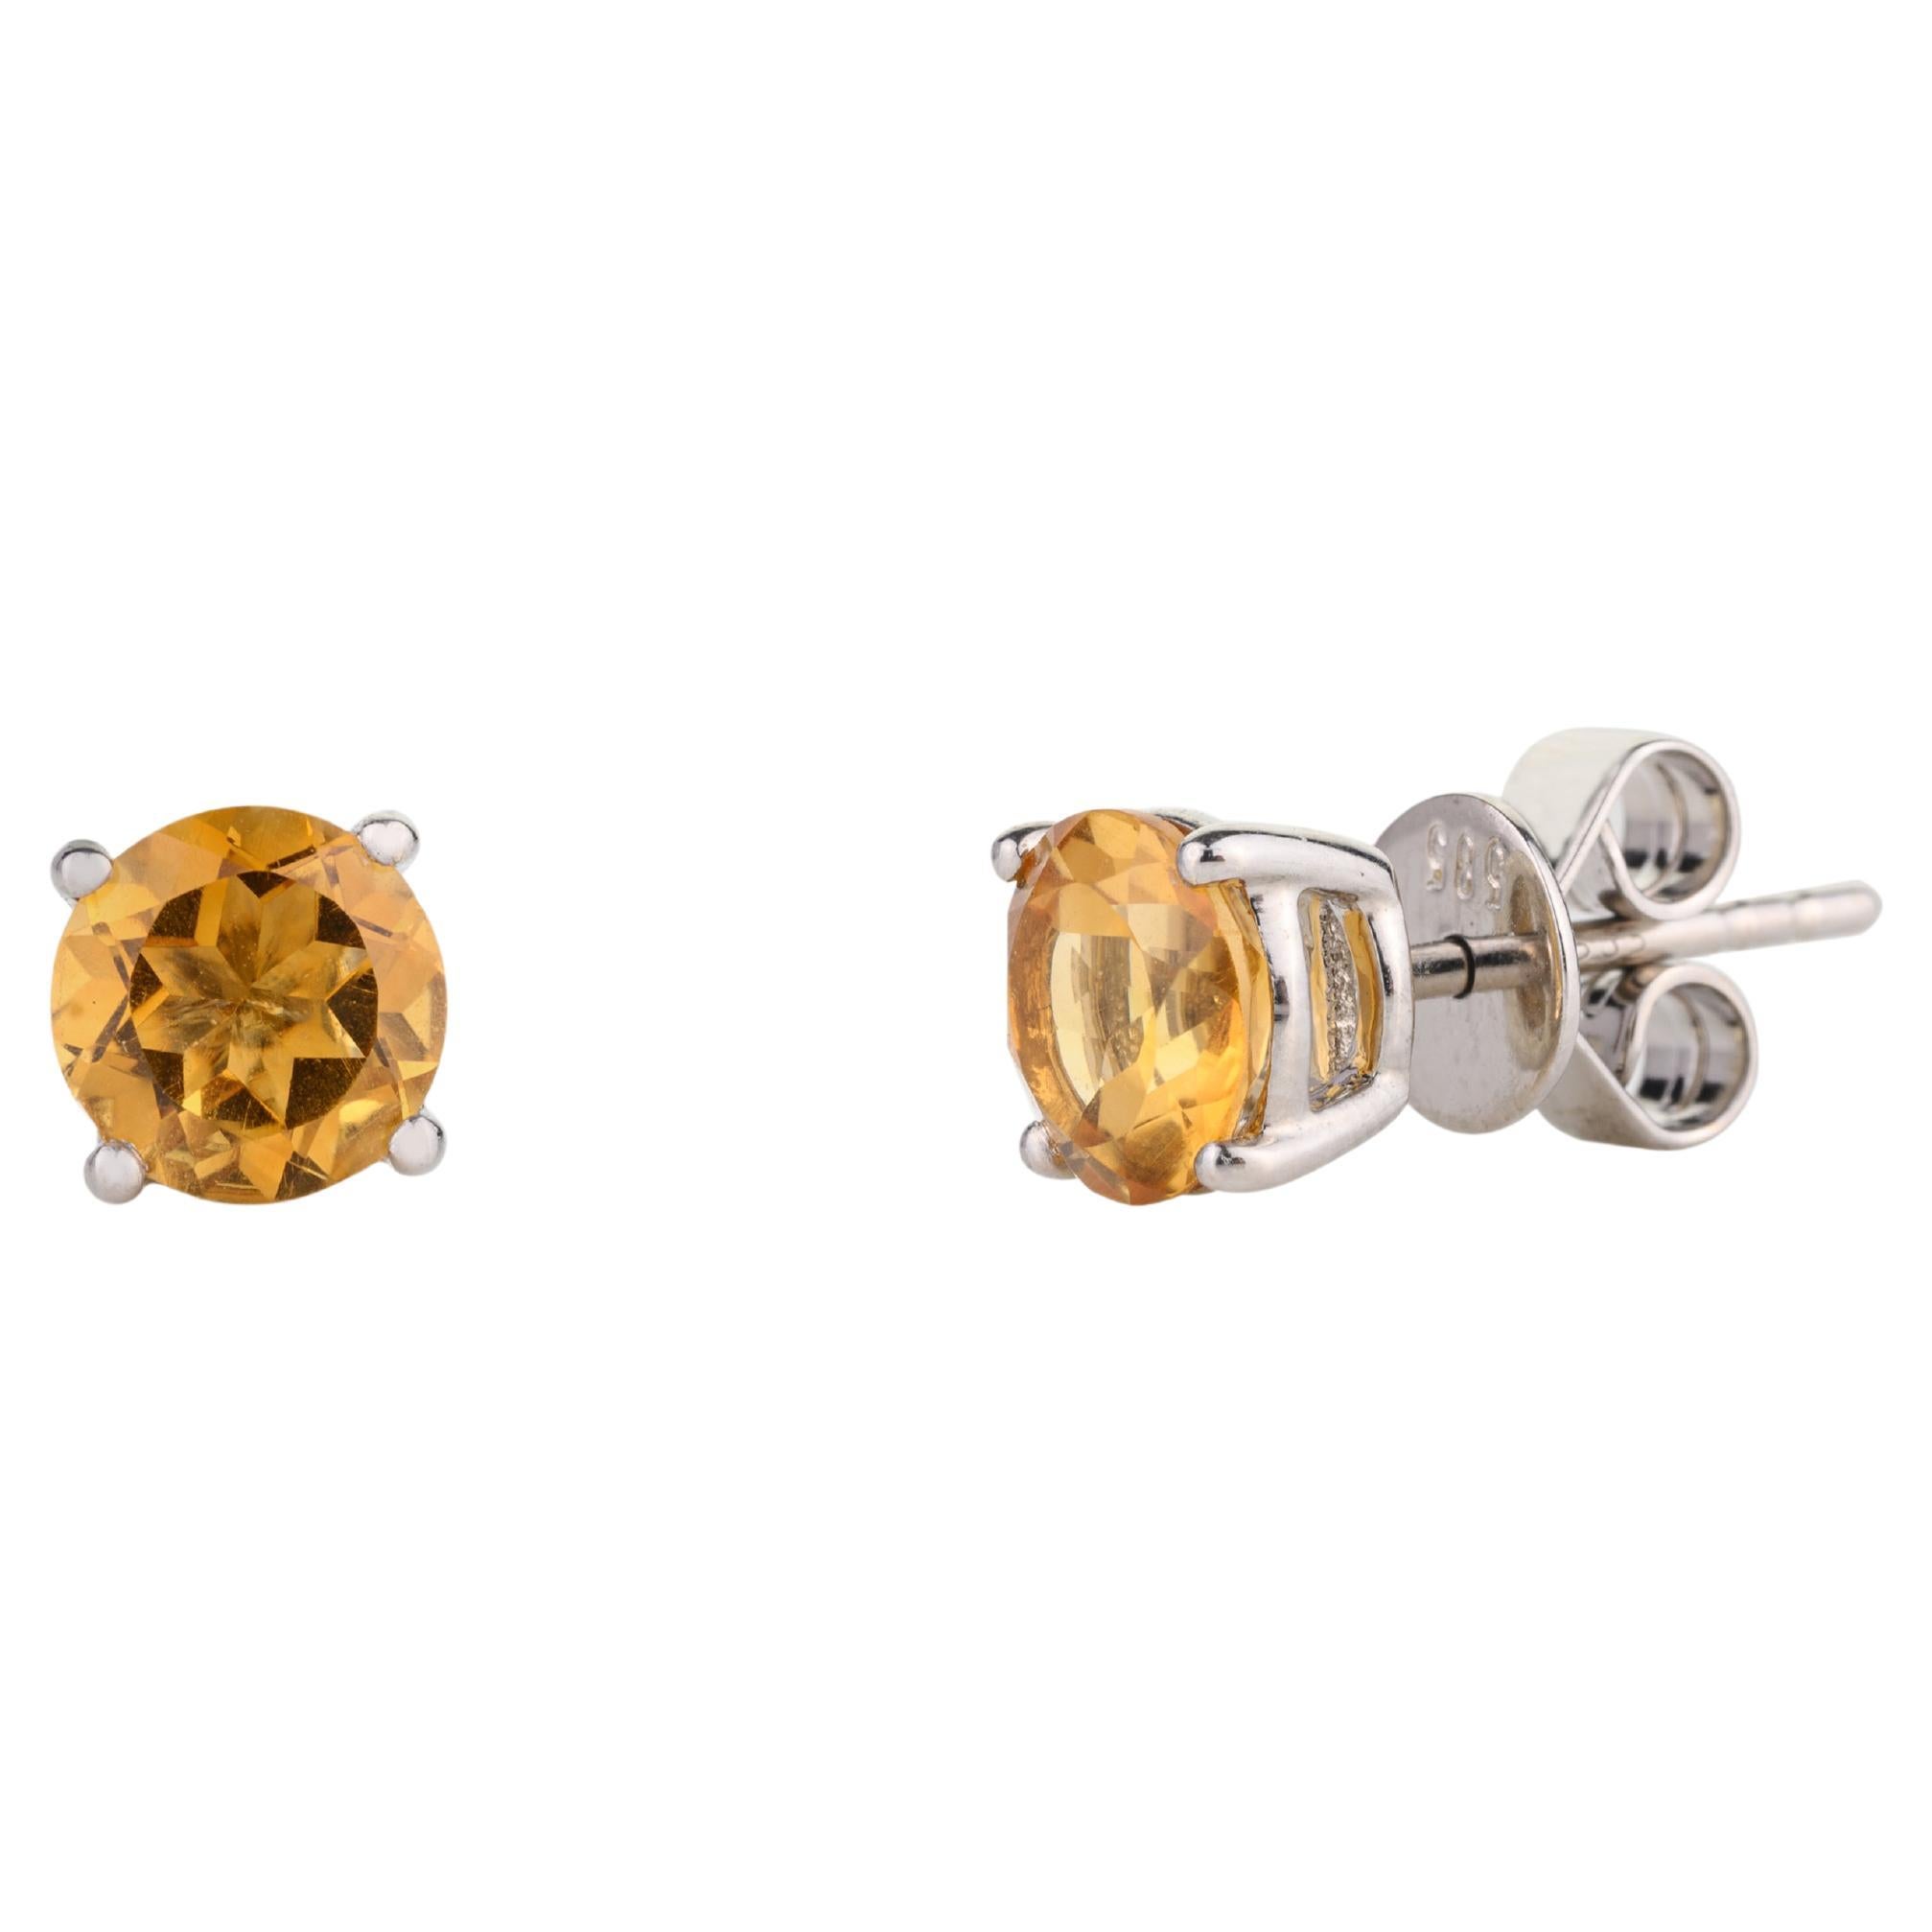 Faceted Citrine Solitaire Stud Earrings in 14k White Gold Gift for Her